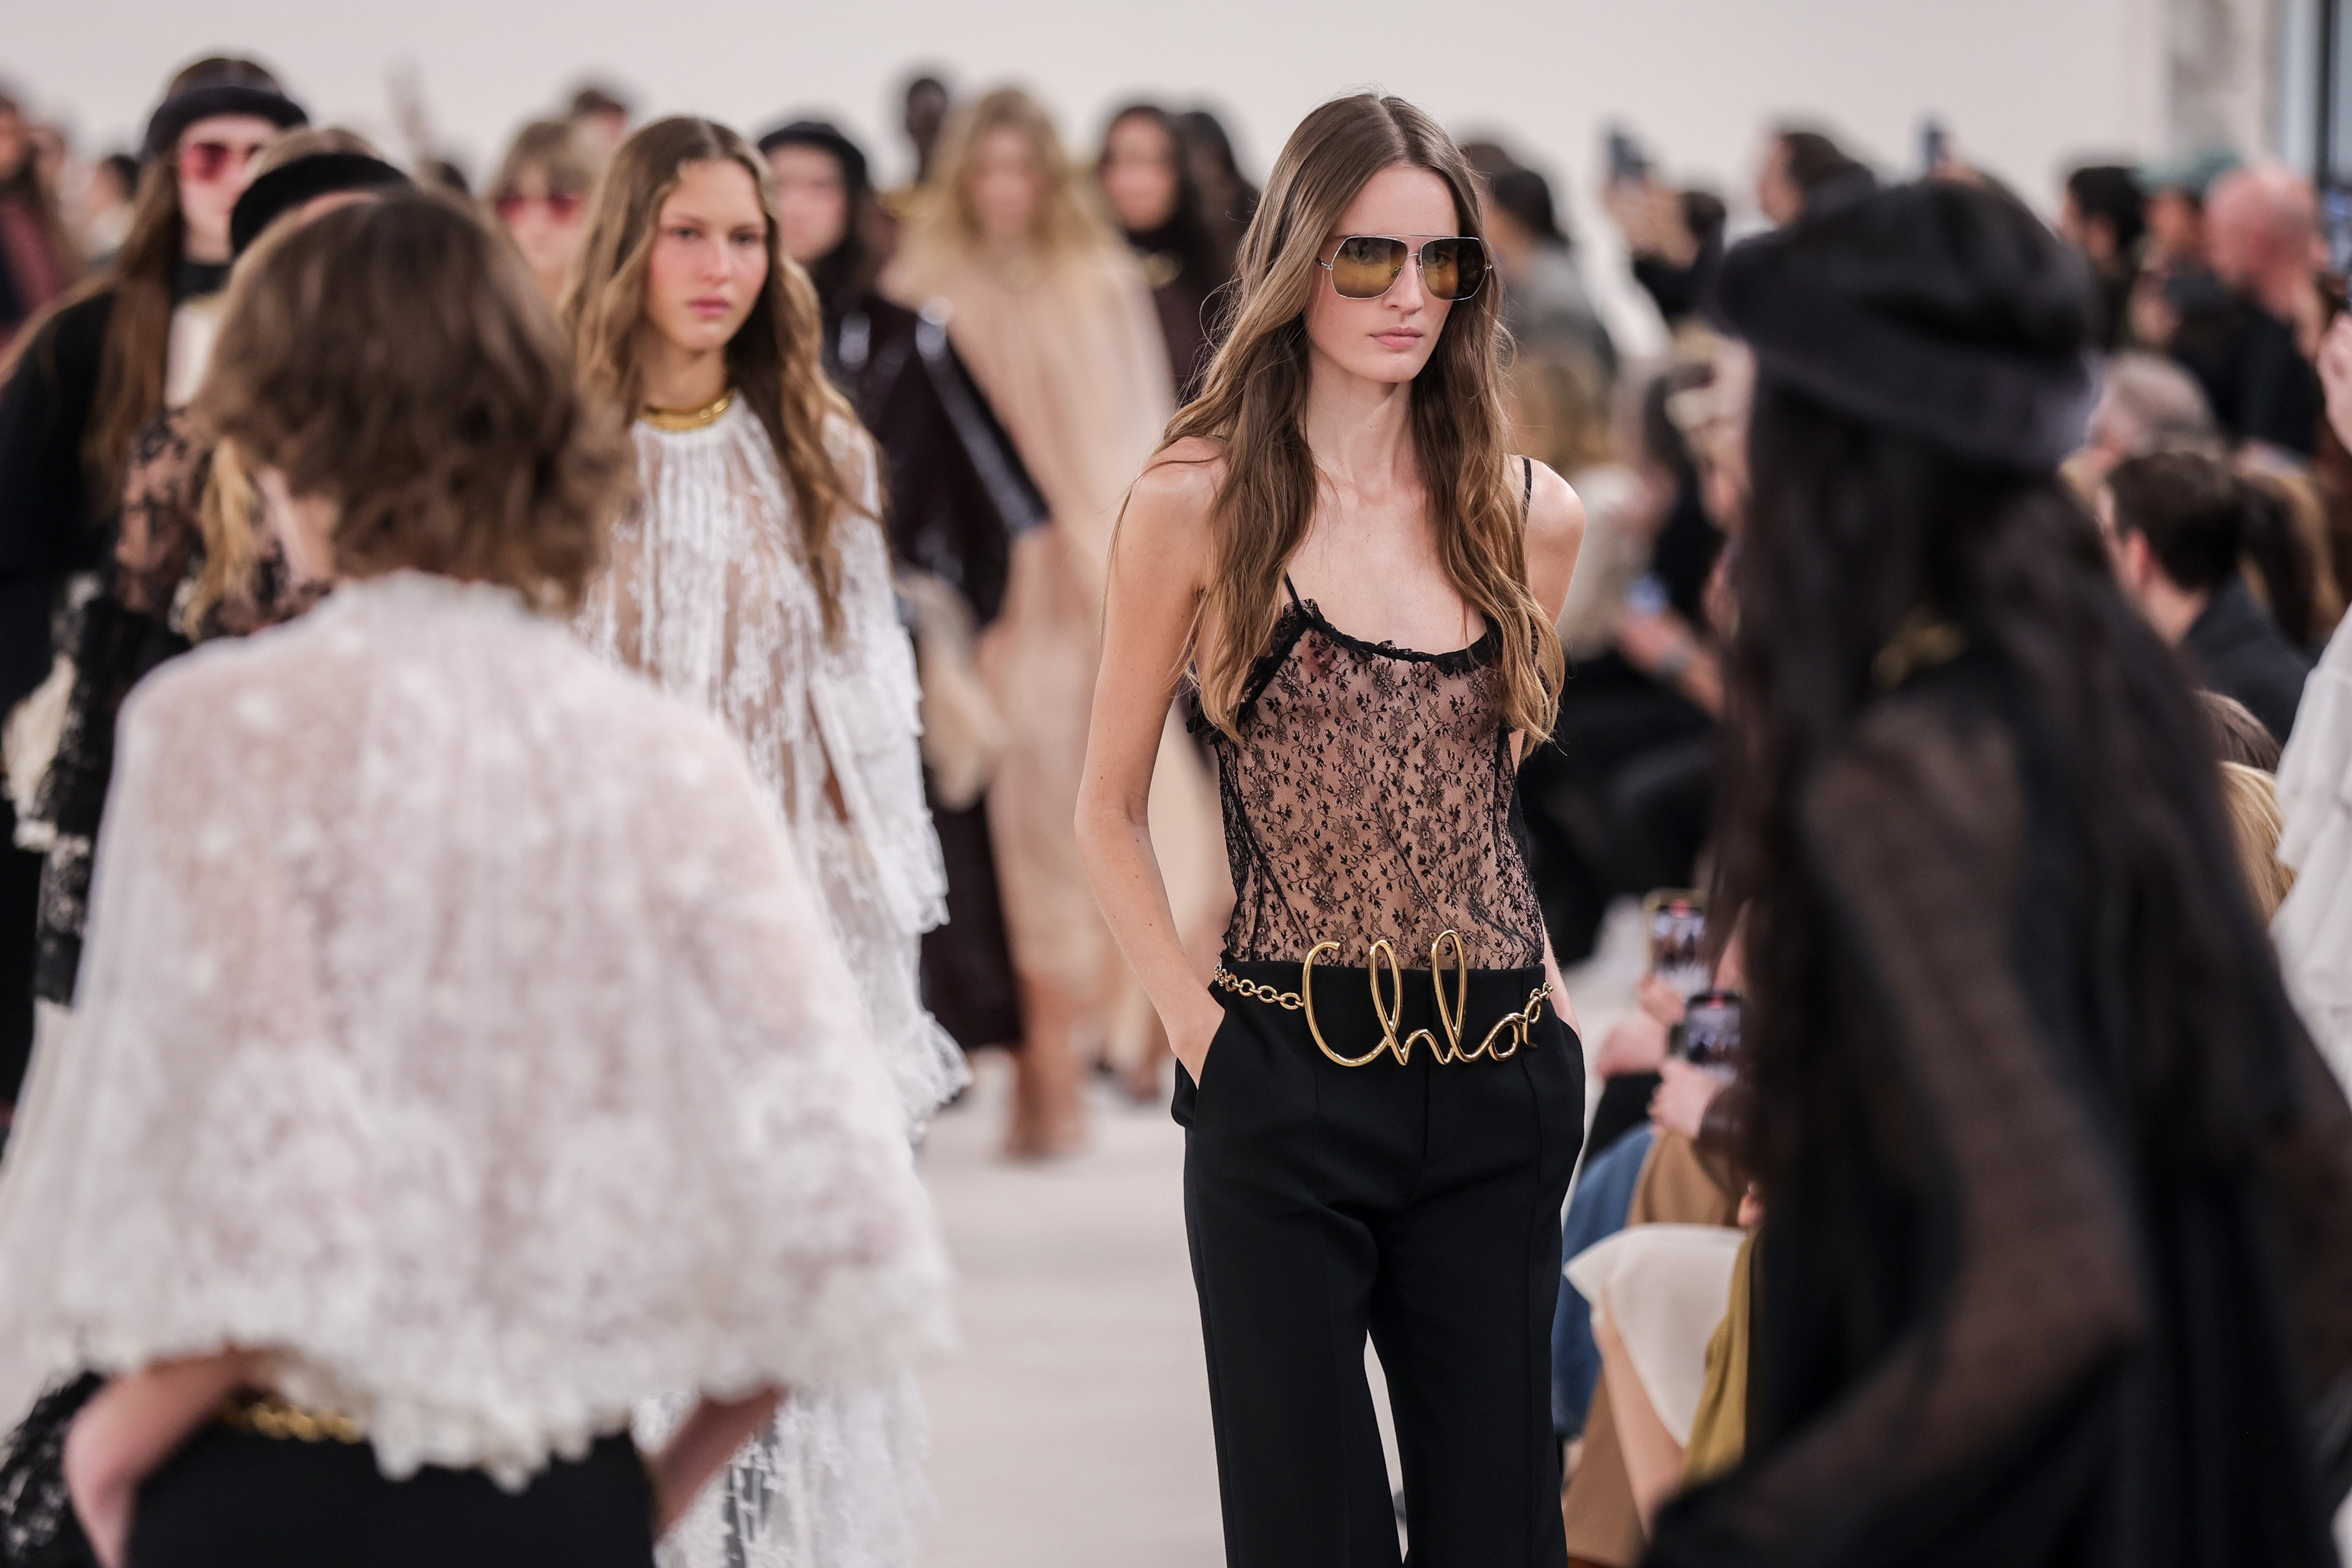 Paris Fashion Week Gets Serious With Saint Laurent and Dior